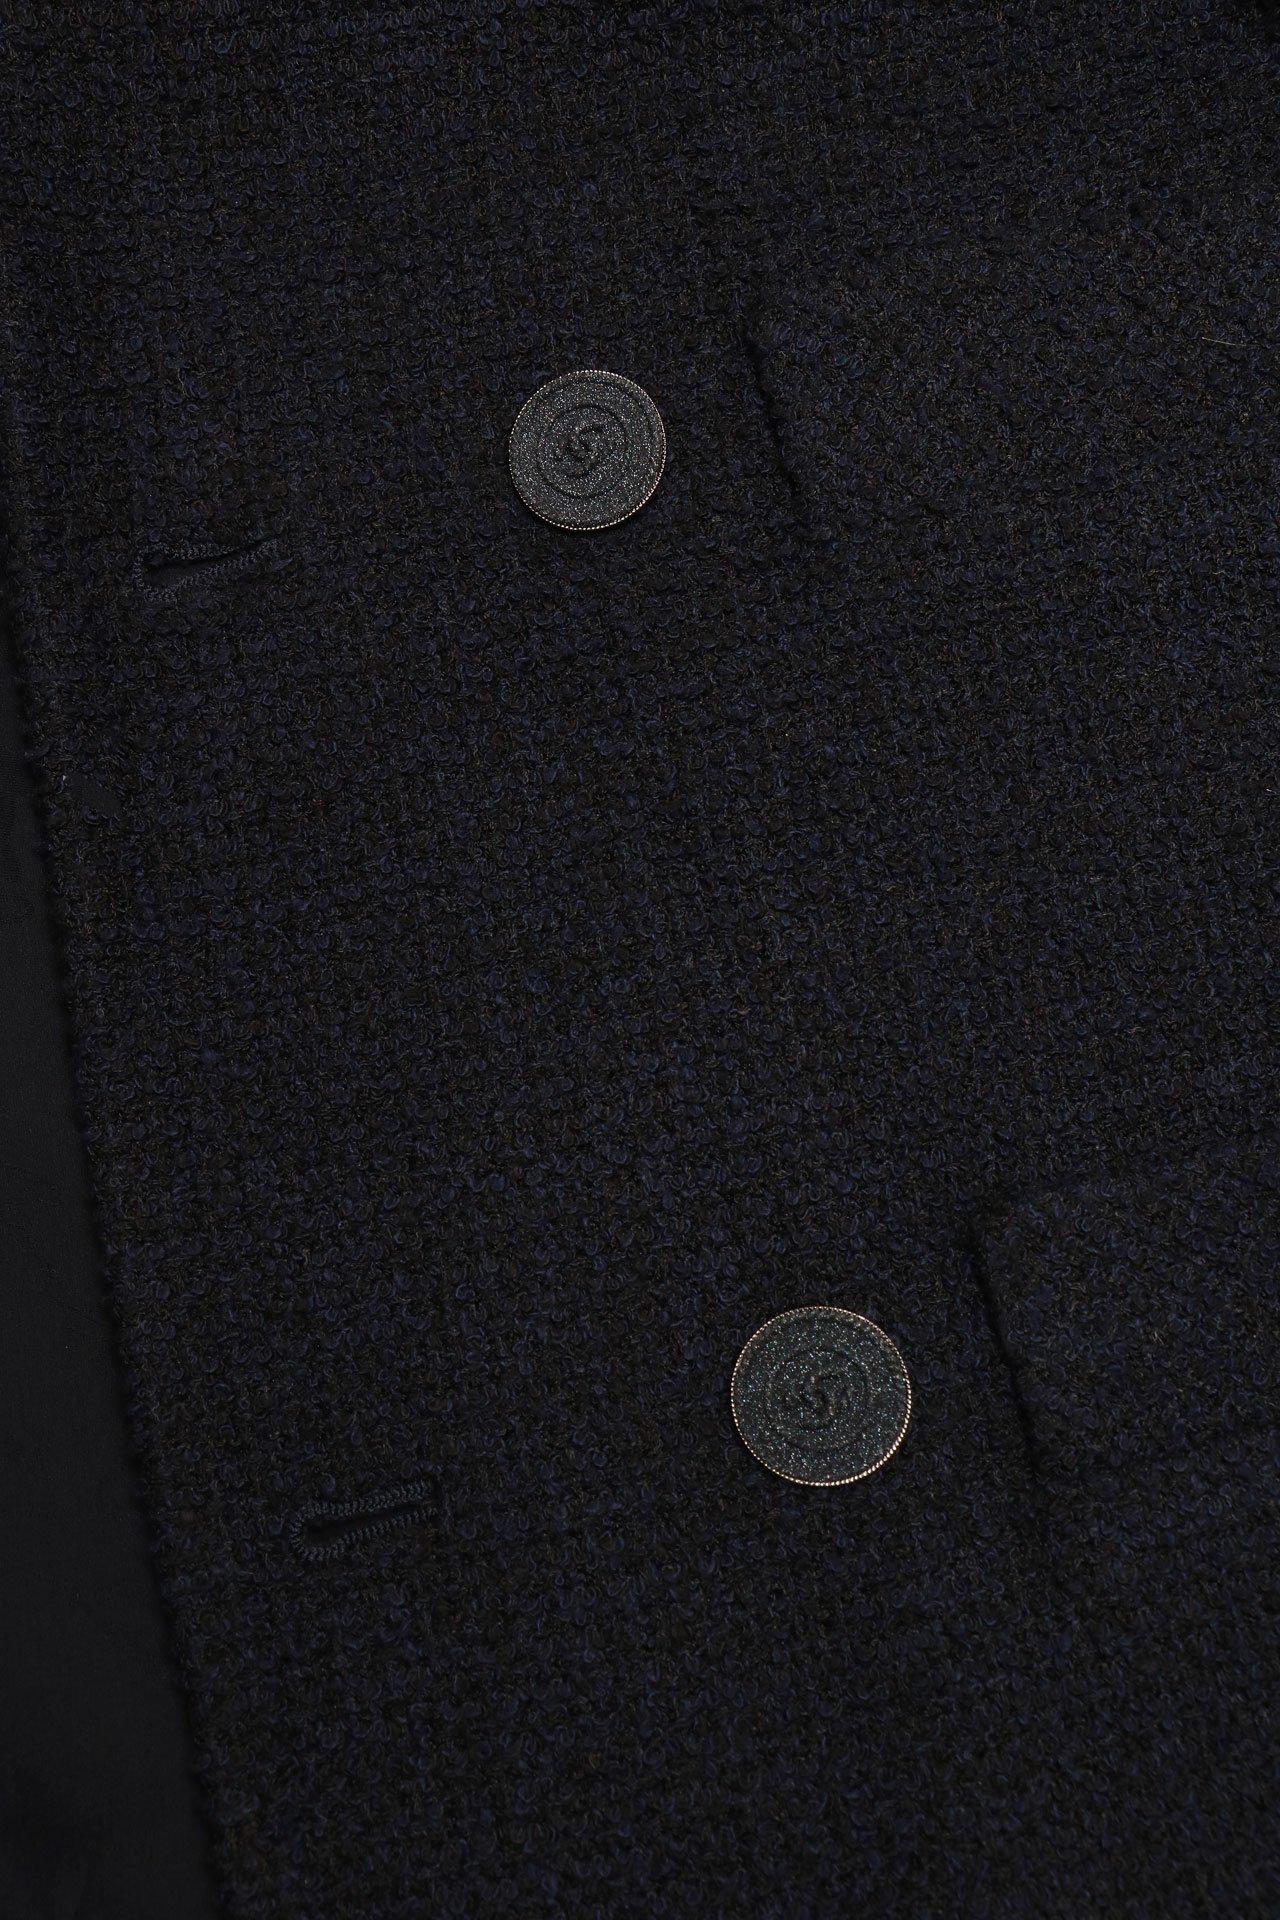 Chanel New CC Buttons RelaxedTweed Jacket For Sale 1